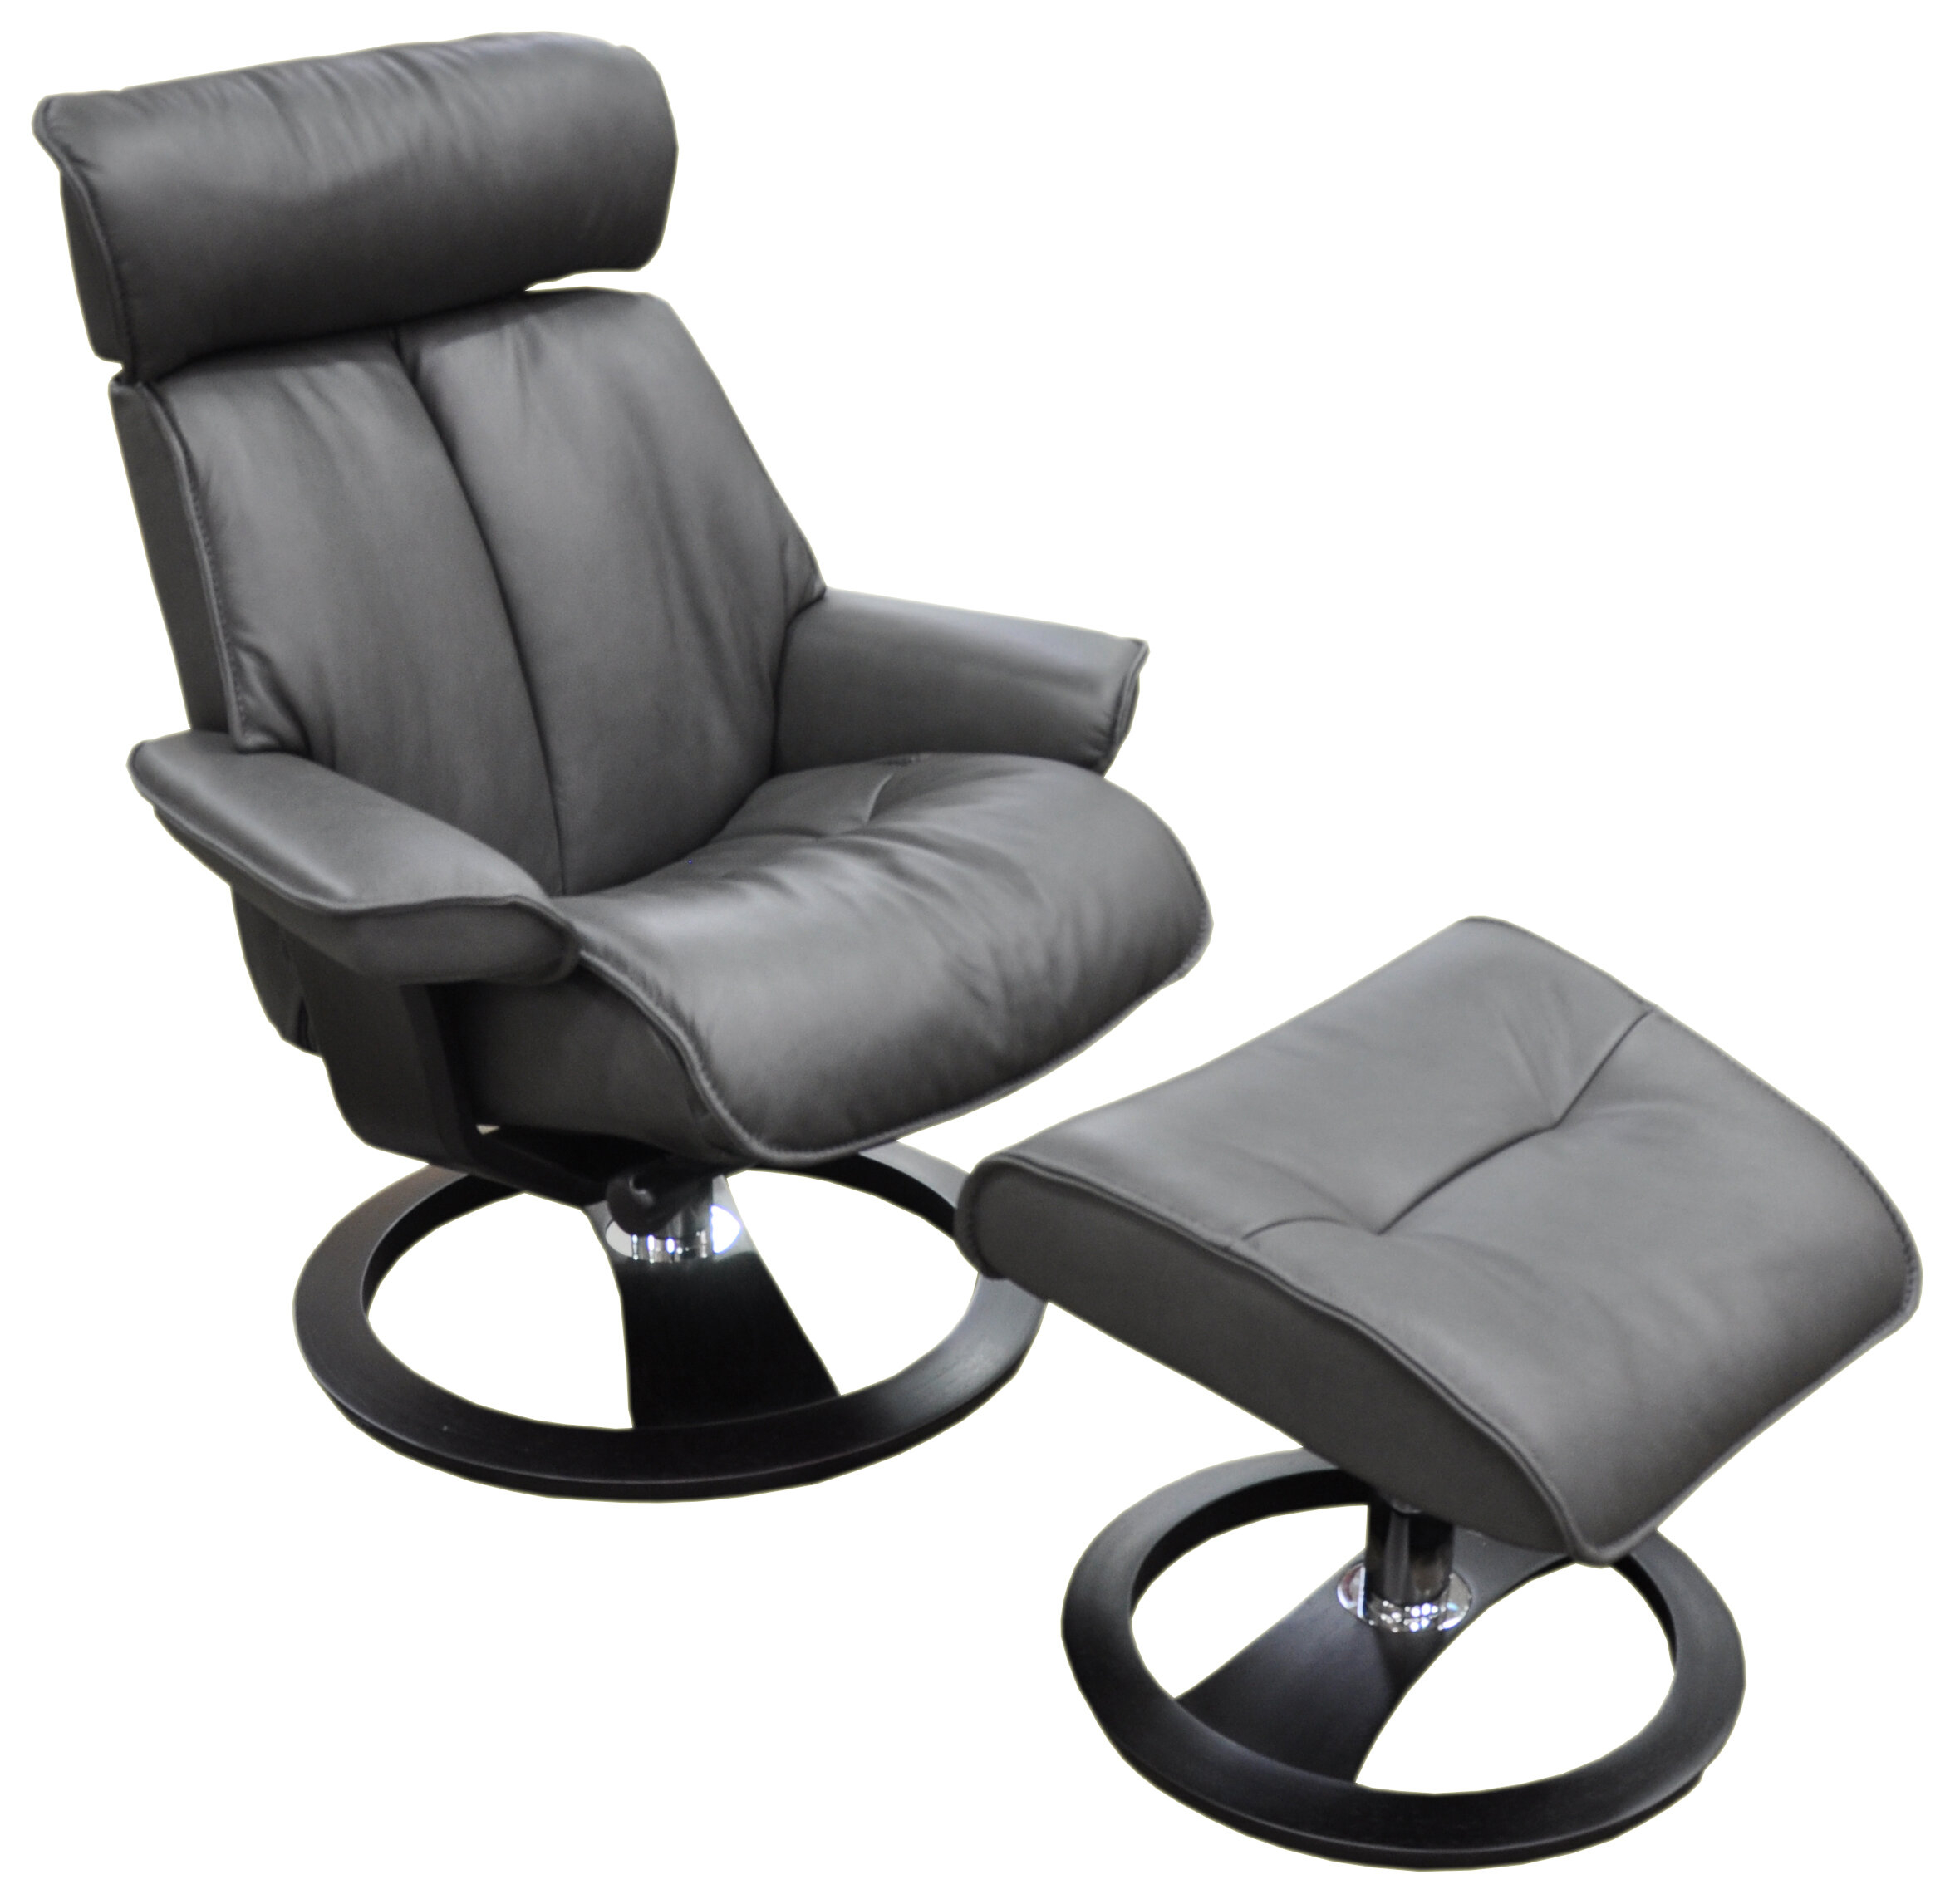 Leather Swivel Reclining Chairs, Black Leather Swivel Recliner Chair